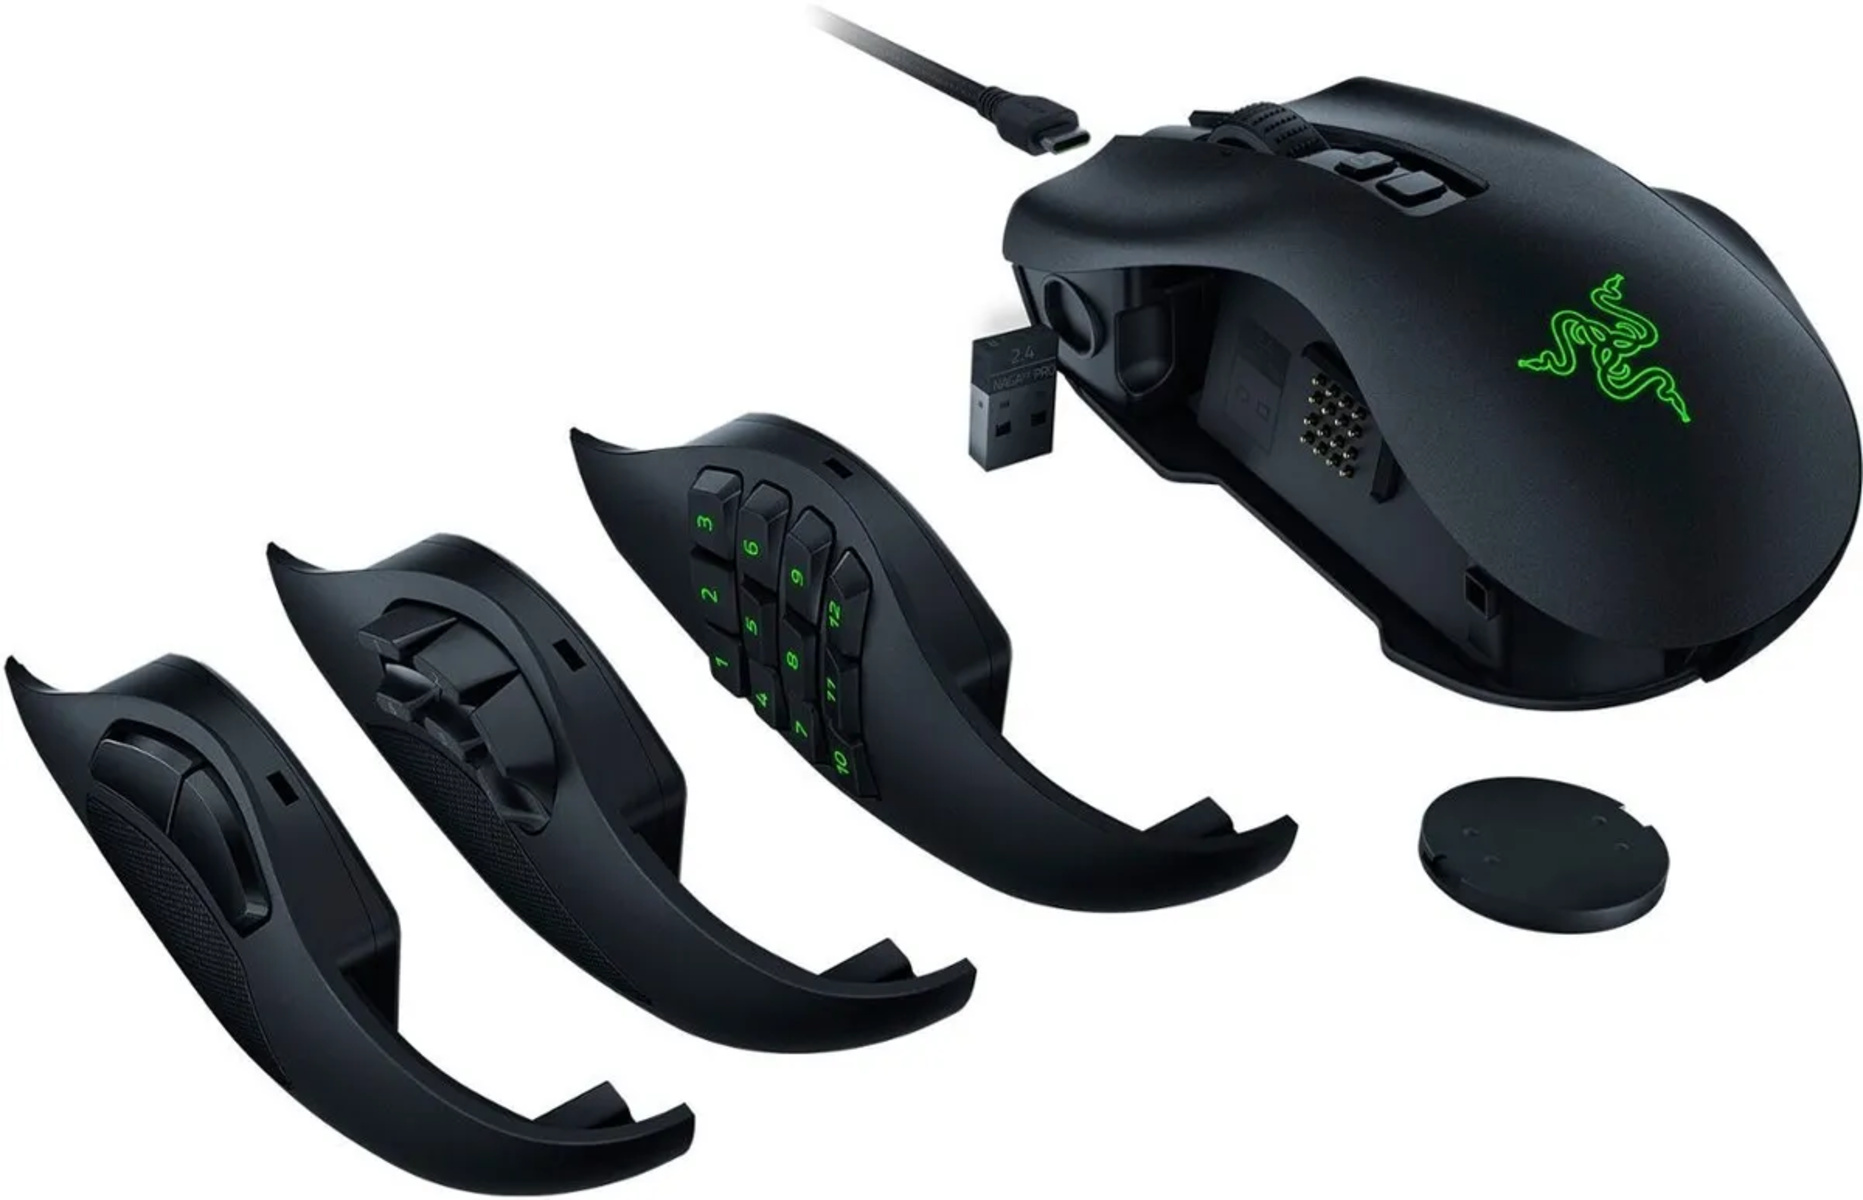 How To Map Keys On Razer Rz01-0104 Gaming Mouse